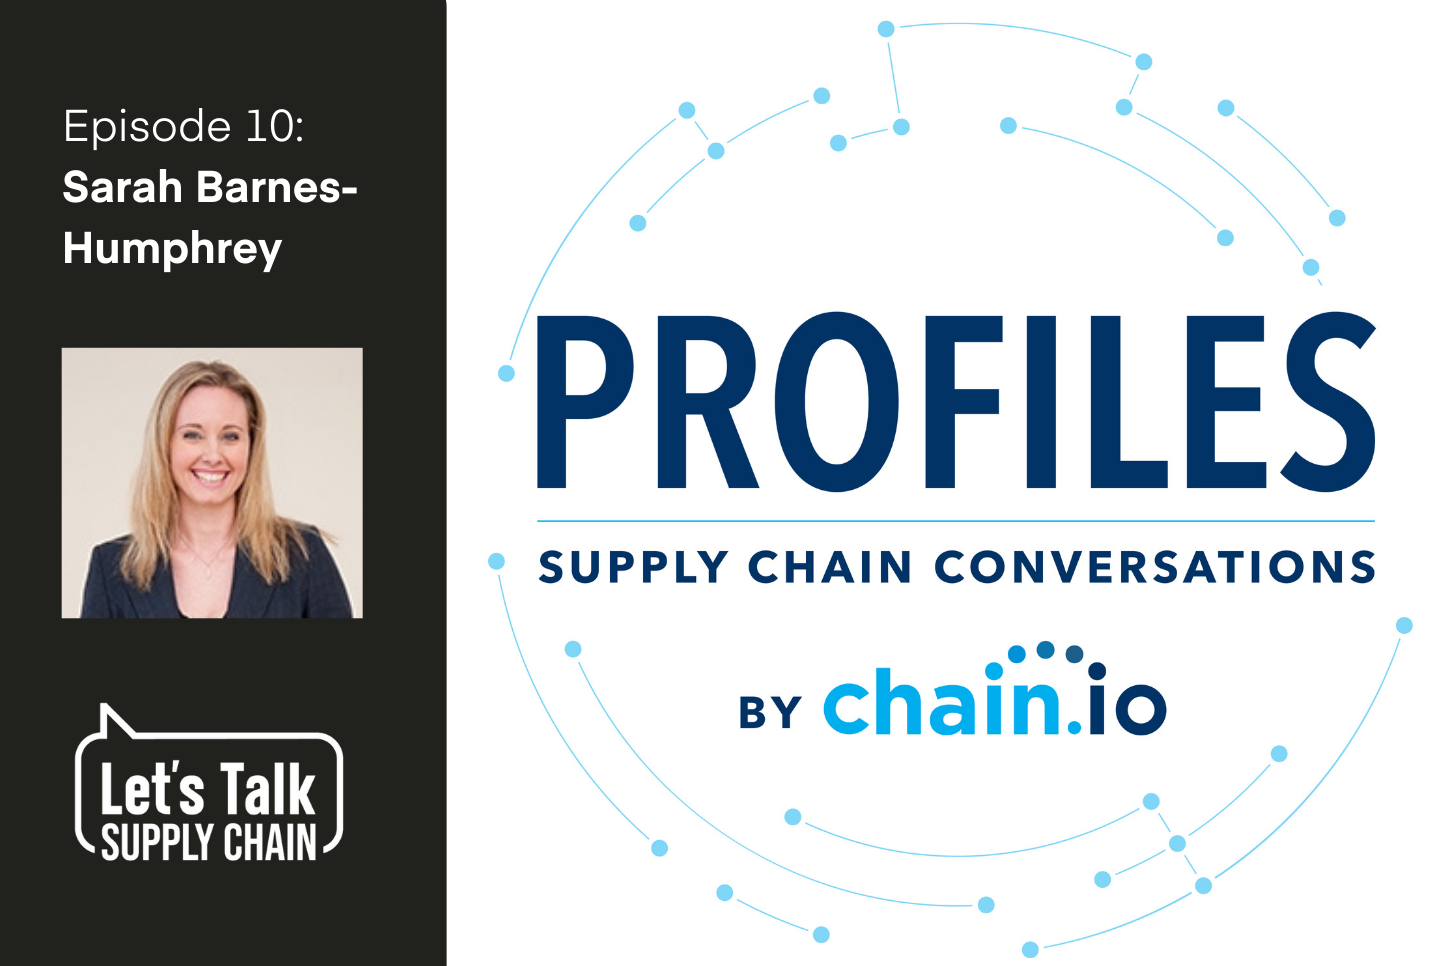 Sarah Barnes-Humphrey of Let's Talk Supply Chain joins Chain.io CEO, Brian Glick to talk all things supply chain, customer relationships, and lessons learned from the industry. 